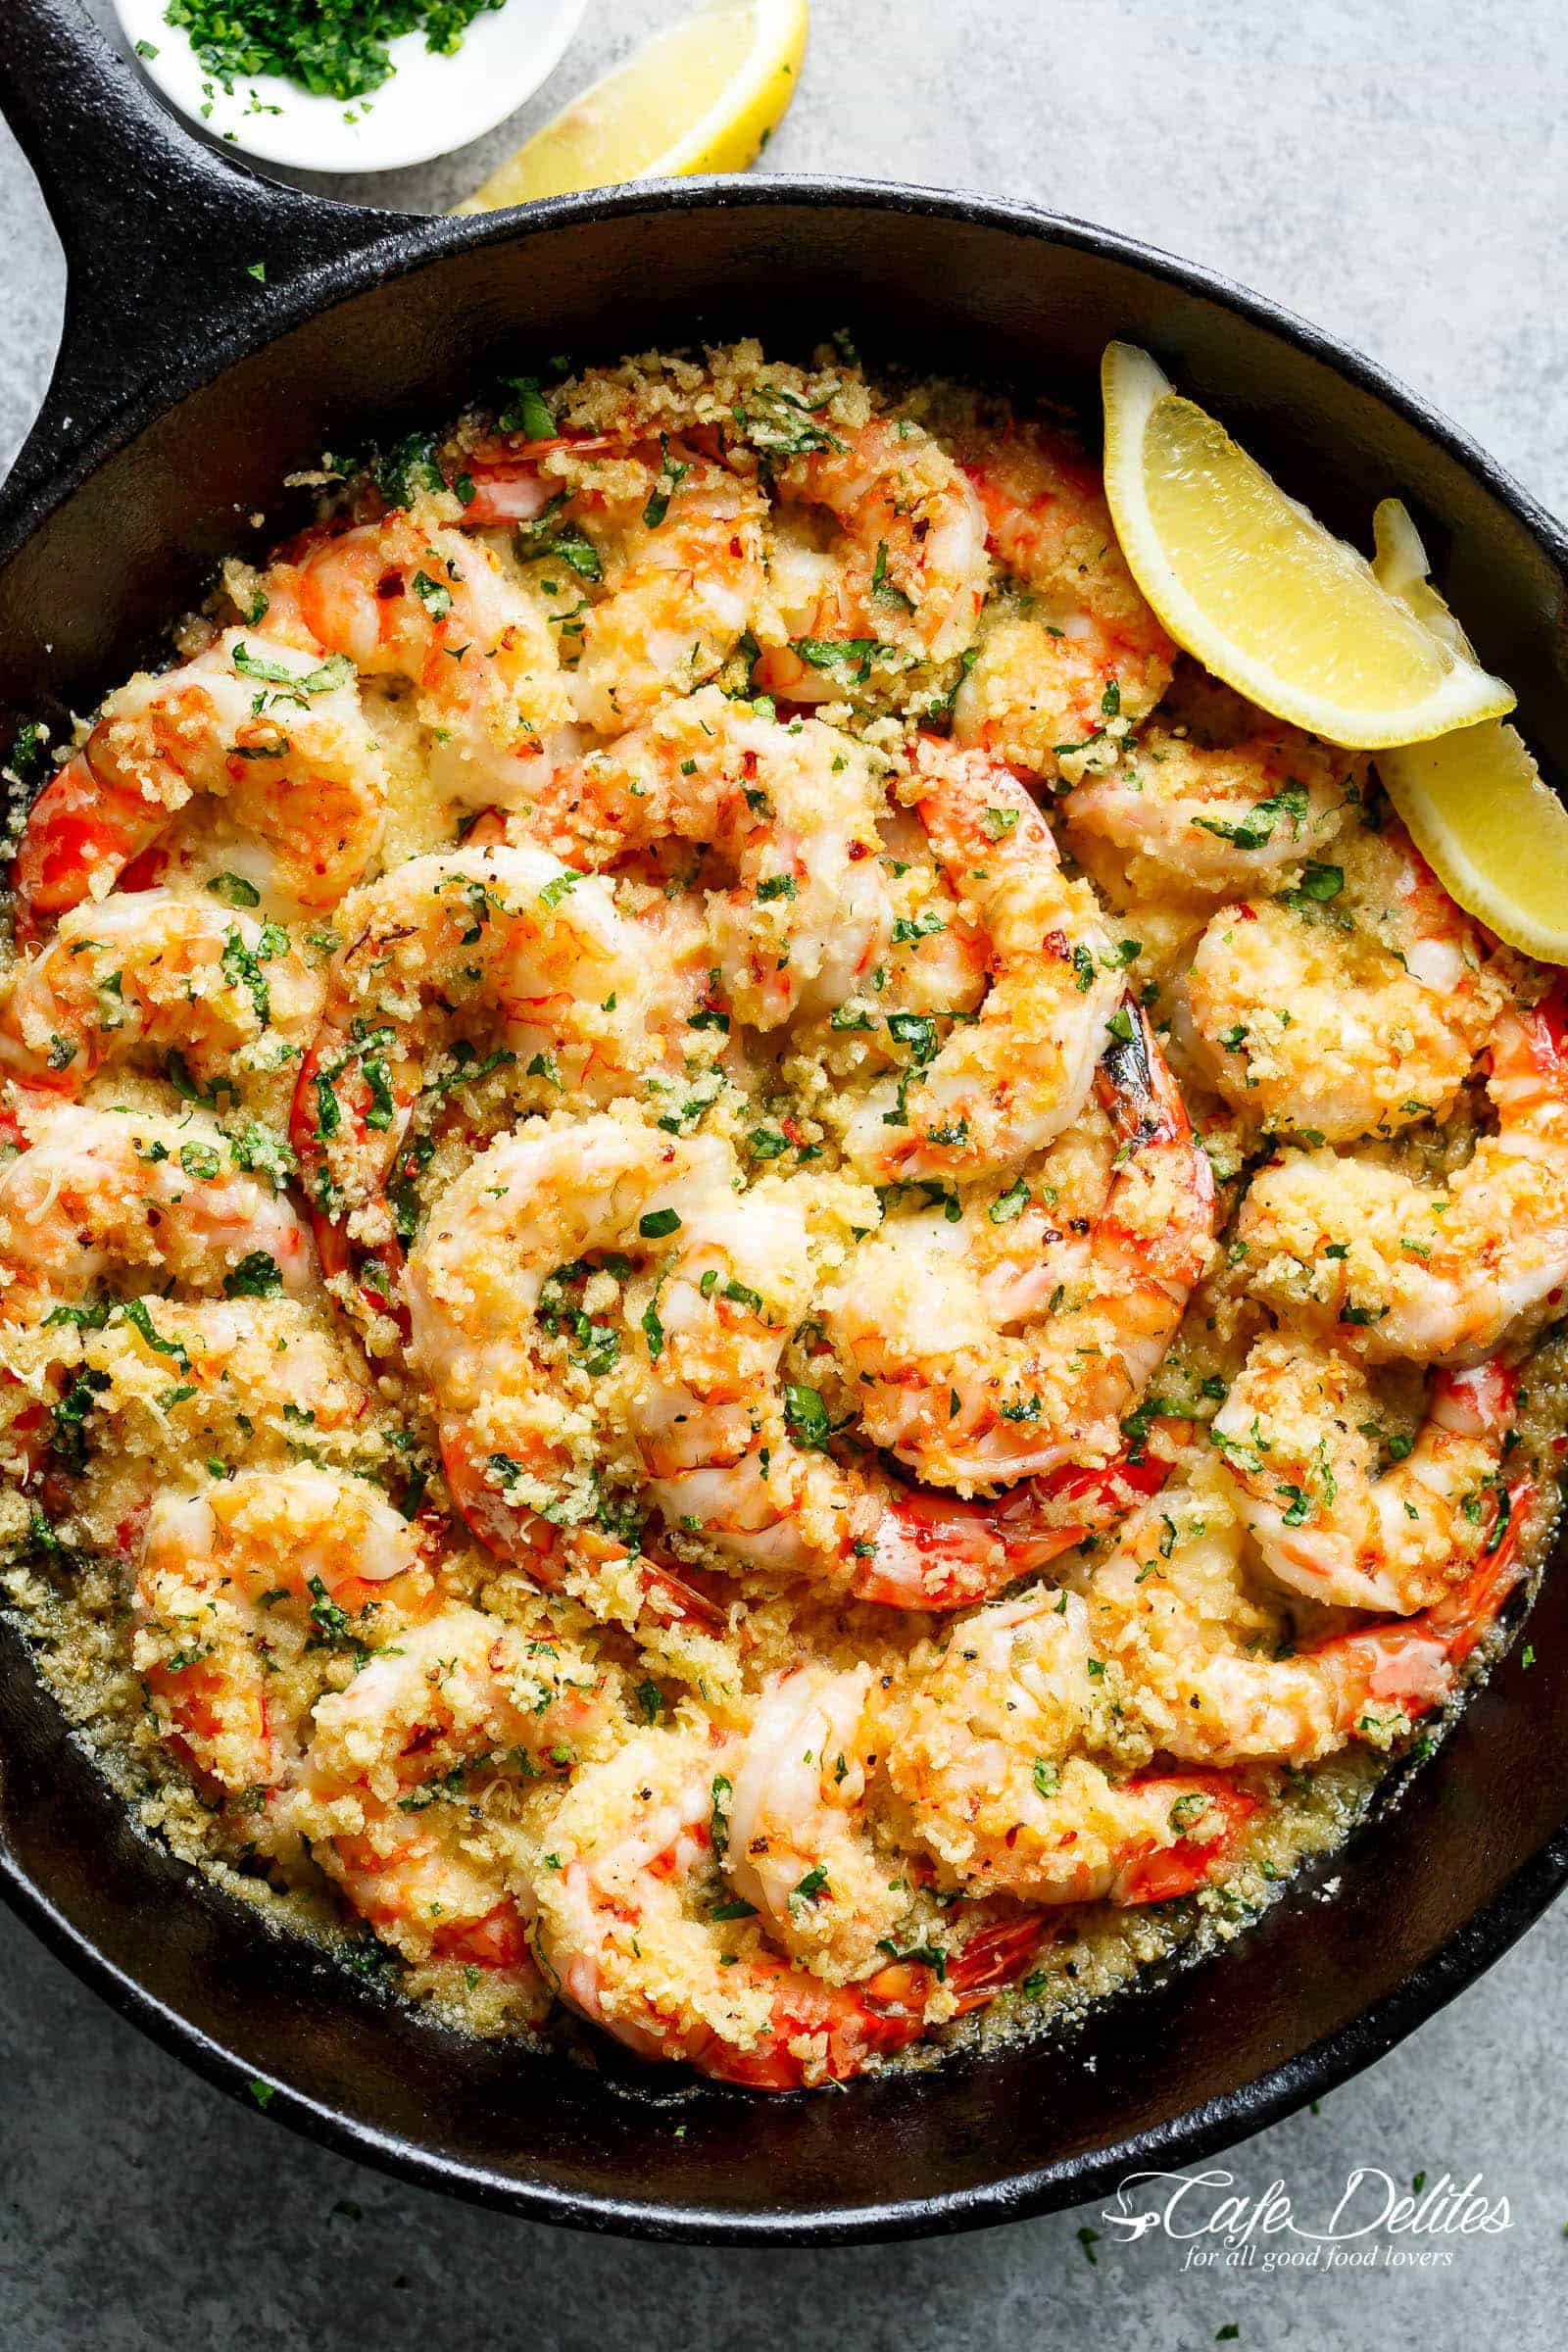 Oven baked shrimp with a hint of lemon and garlic, topped with flavourful golden and buttery, garlic parmesan breadcrumbs. This Crispy Baked Shrimp Scampi is easy to make with a fancy restaurant flair right at home, and takes only minutes to prepare! | cafedelites.com